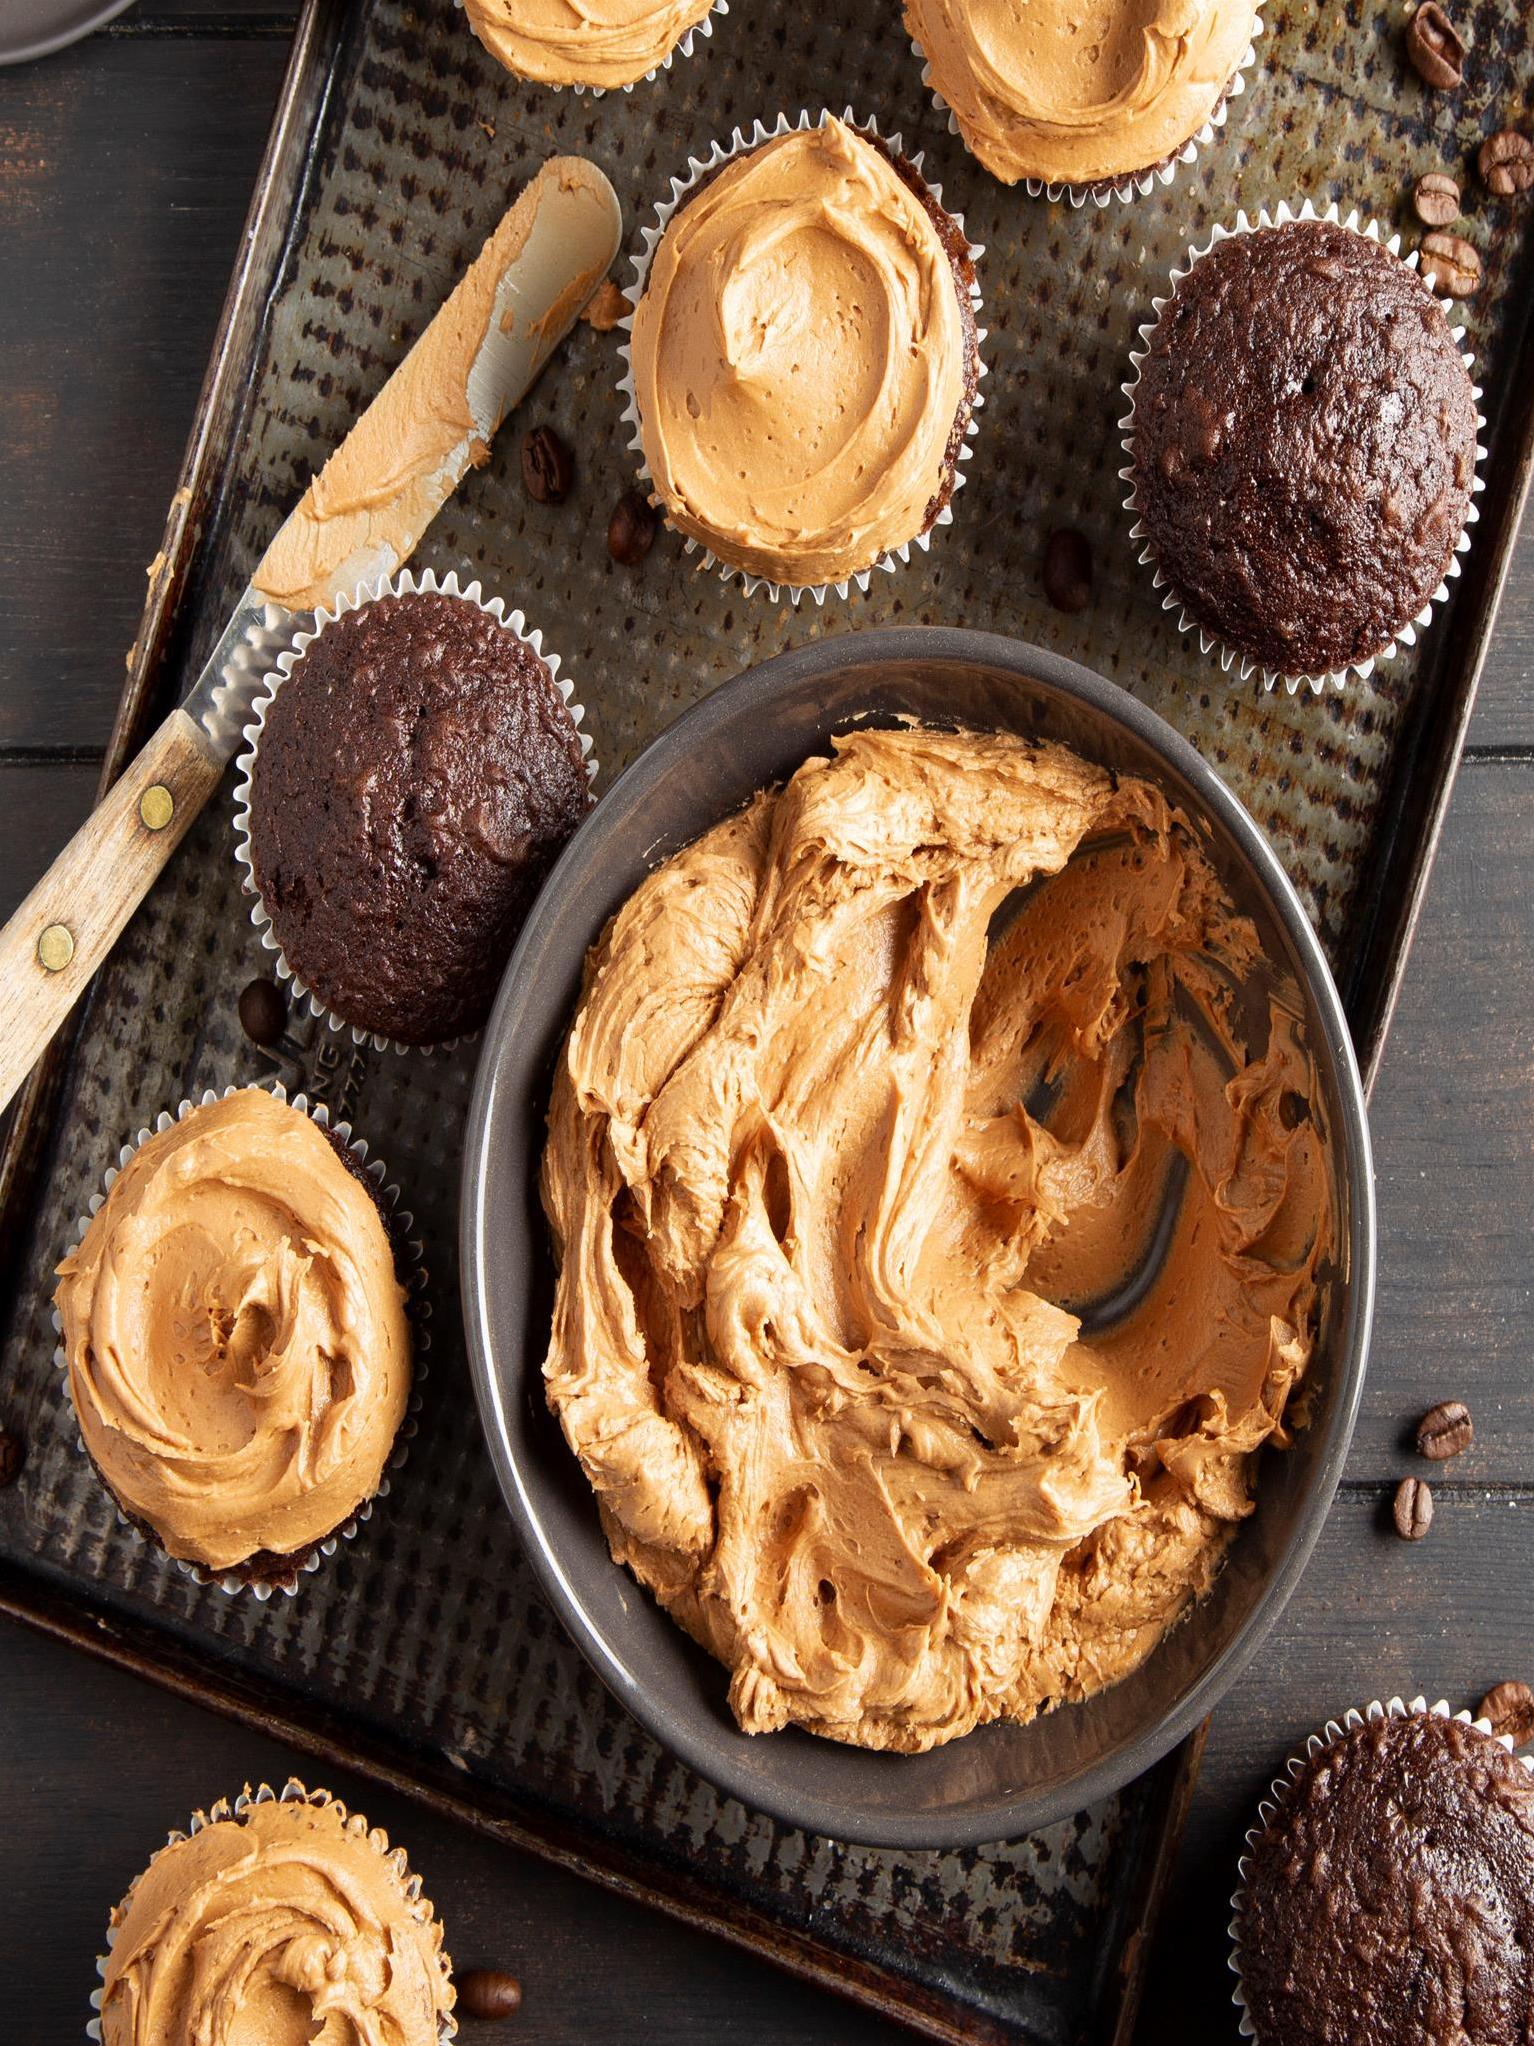  Indulge in the rich and bold flavors of this mocha icing recipe.